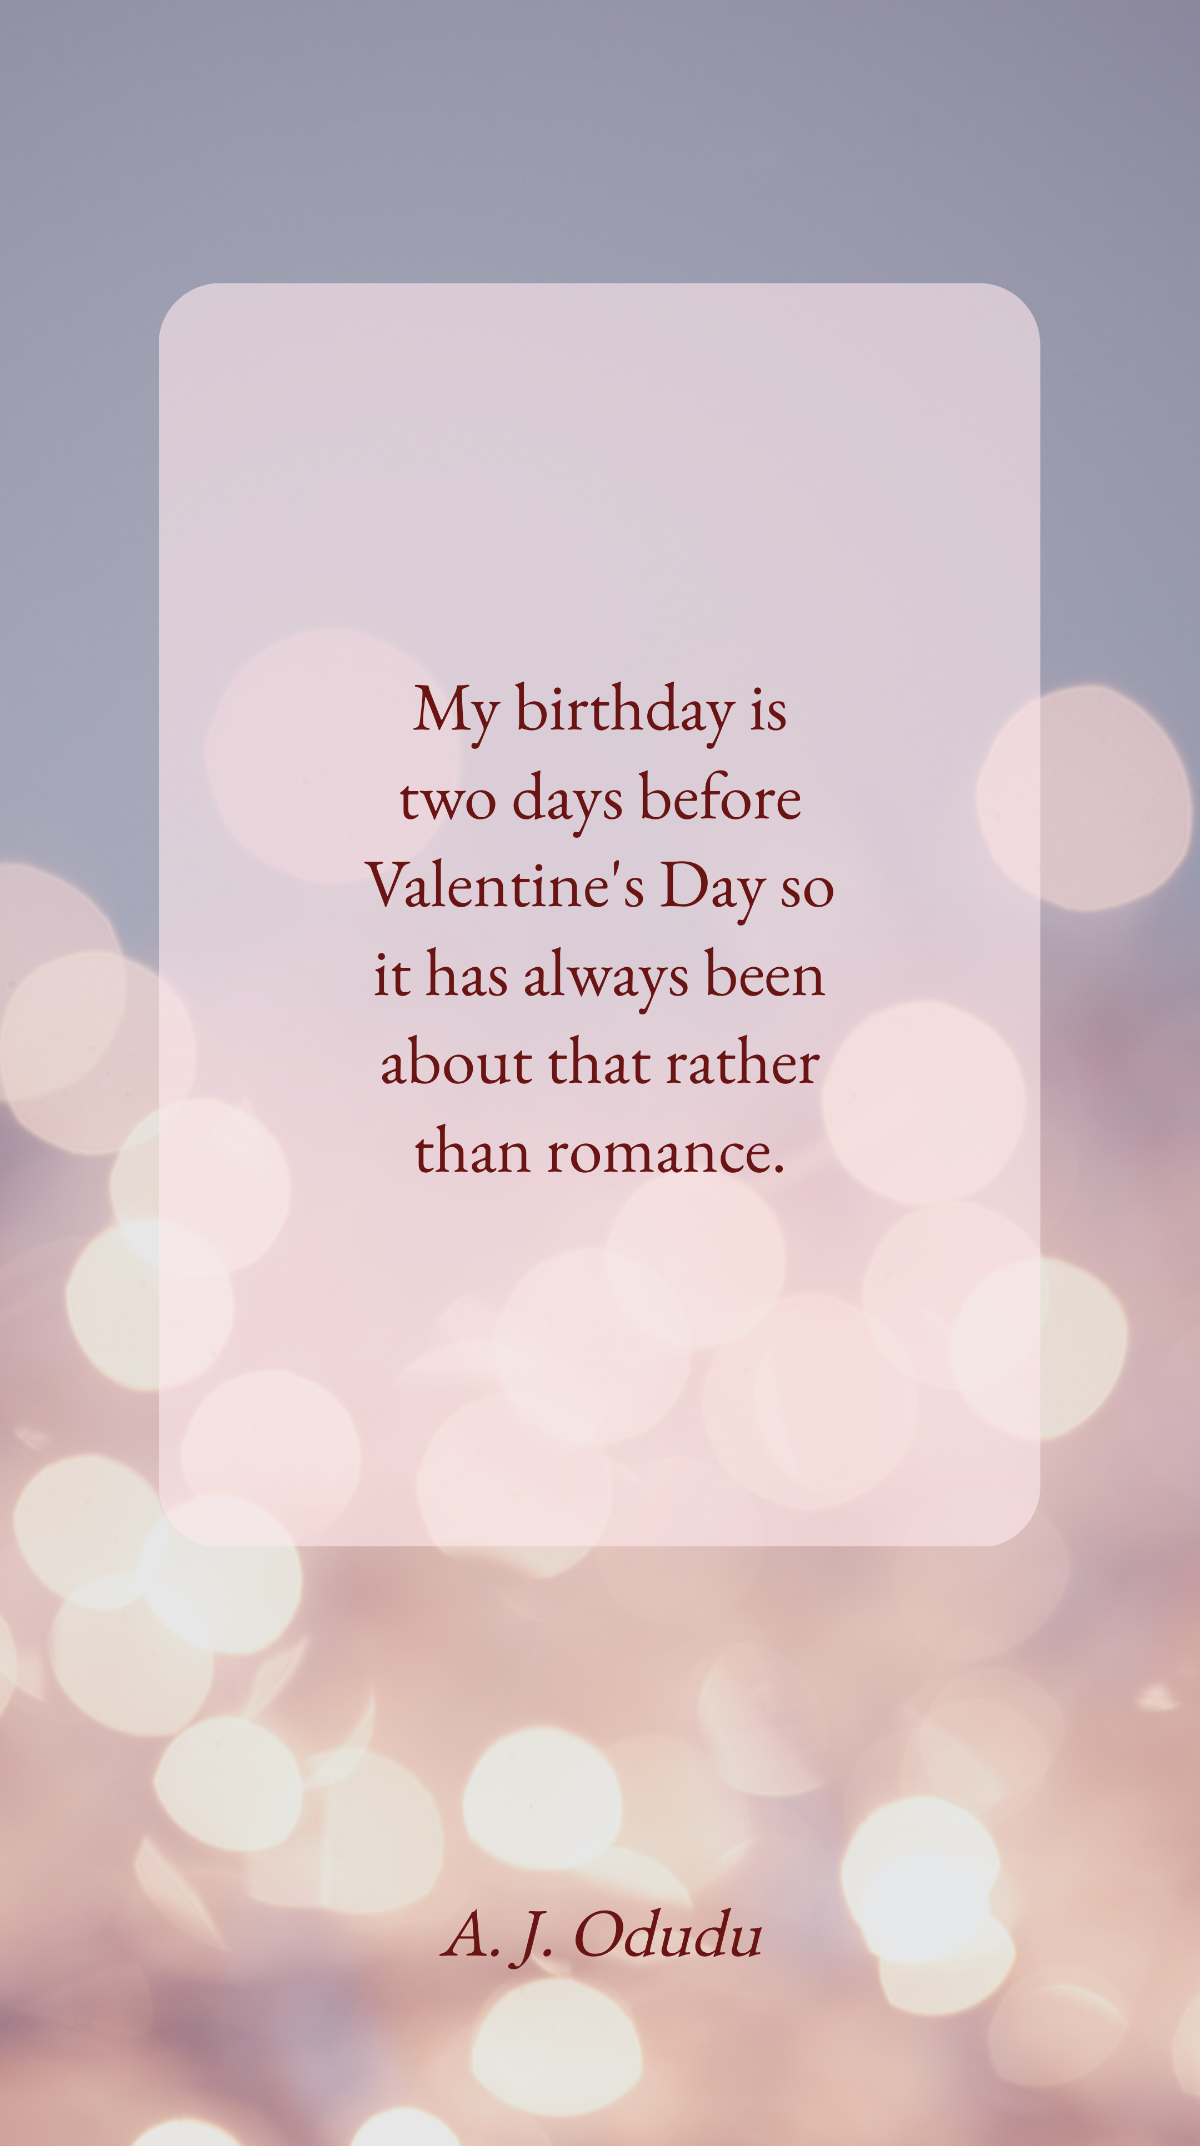 A. J. Odudu - My birthday is two days before Valentine's Day so it has always been about that rather than romance. Template